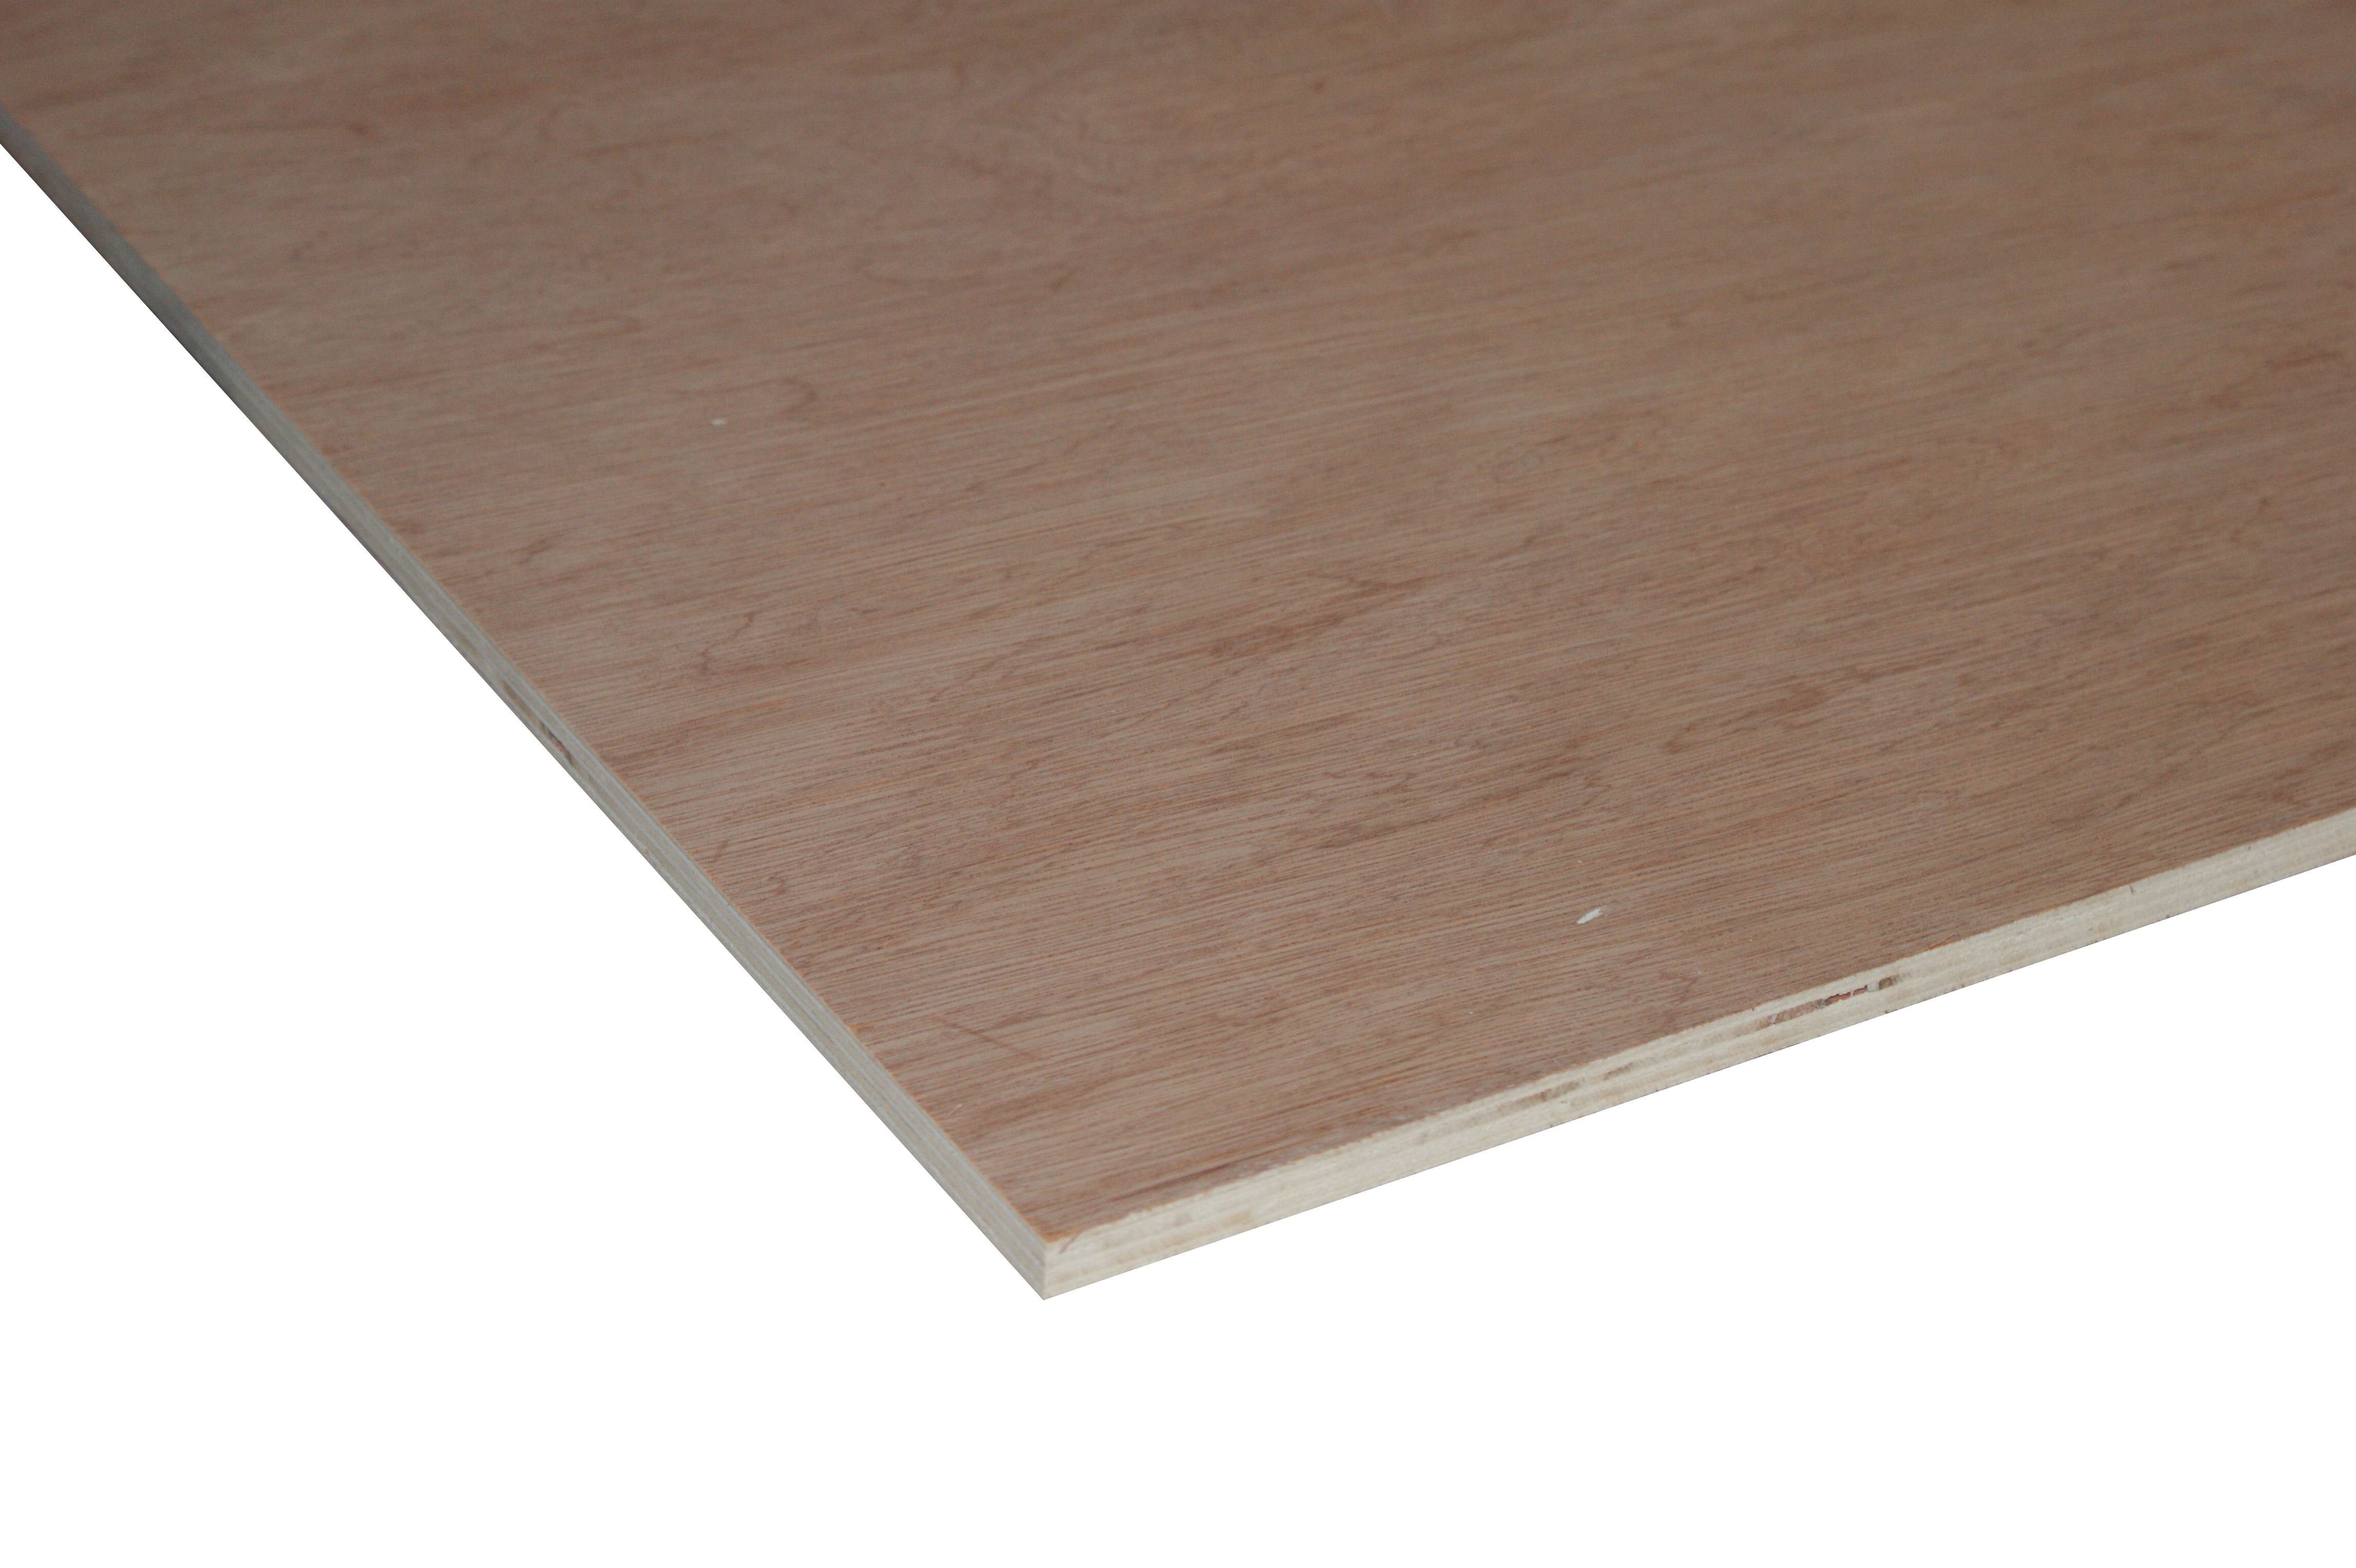 Image of Wickes Non-Structural Hardwood Plywood - 12 x 606 x 1220mm